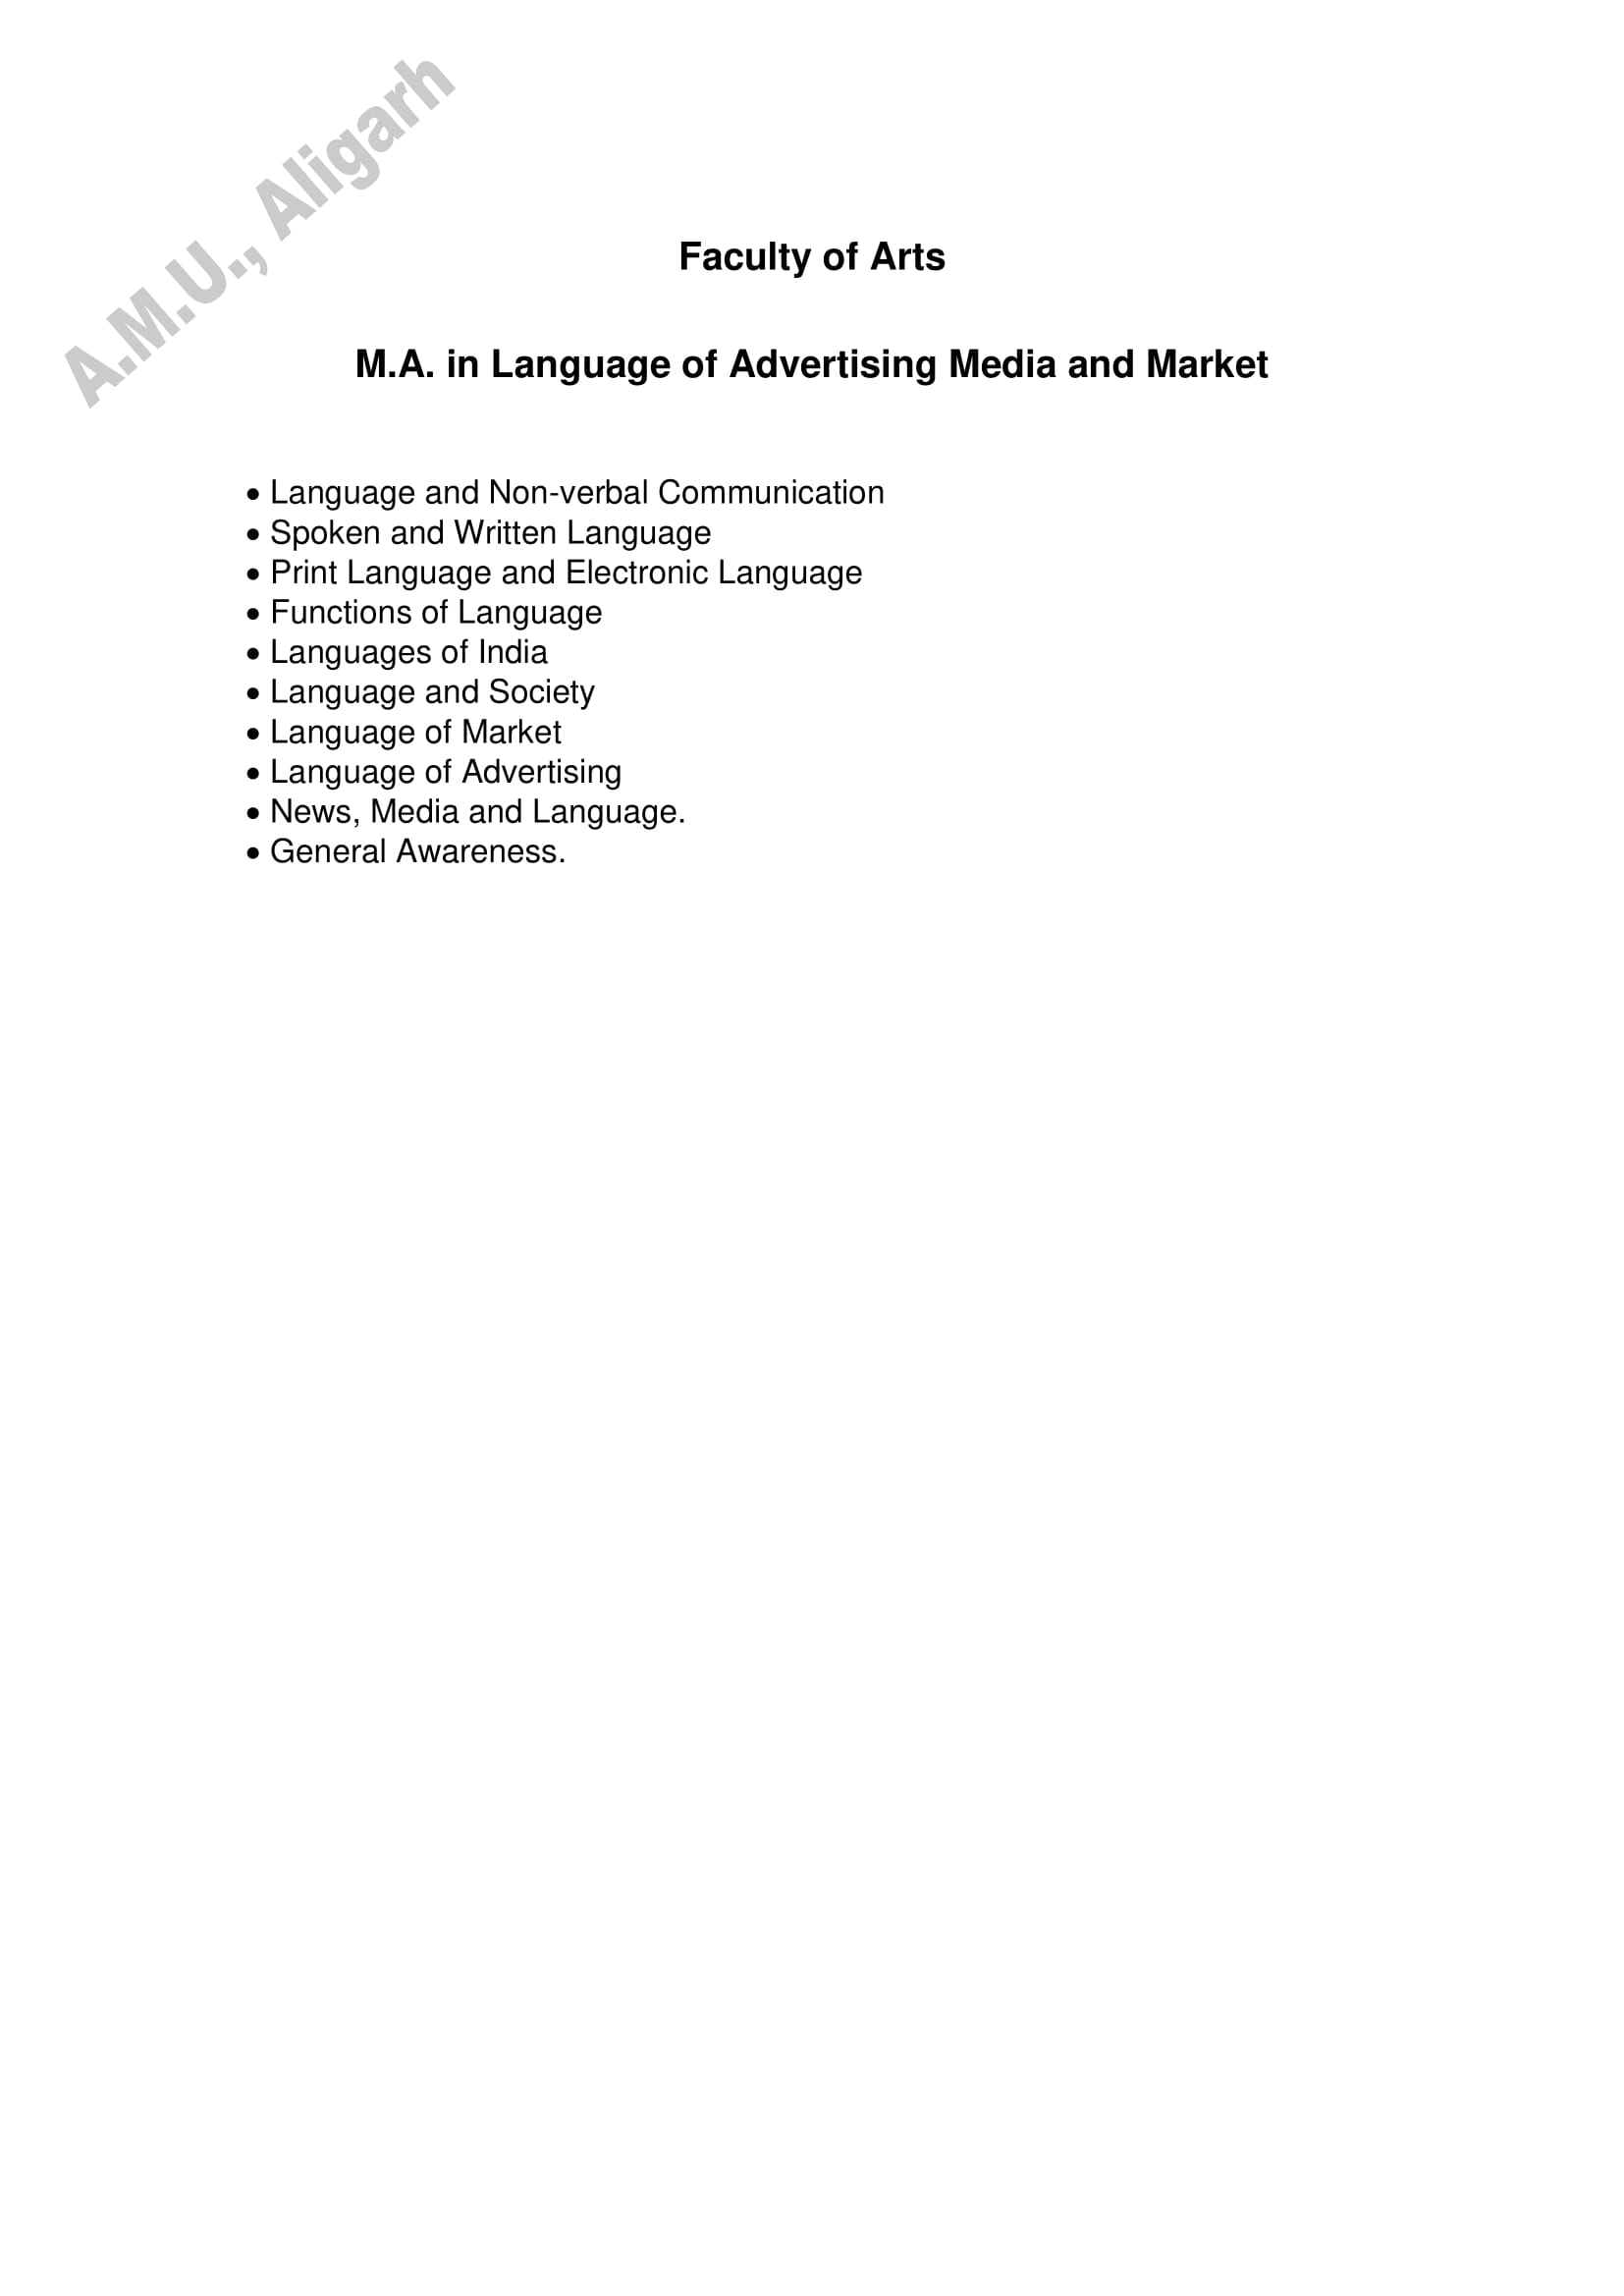 AMU Entrance Exam Syllabus for M.A. in Language of Advertising Media and Market - Page 1